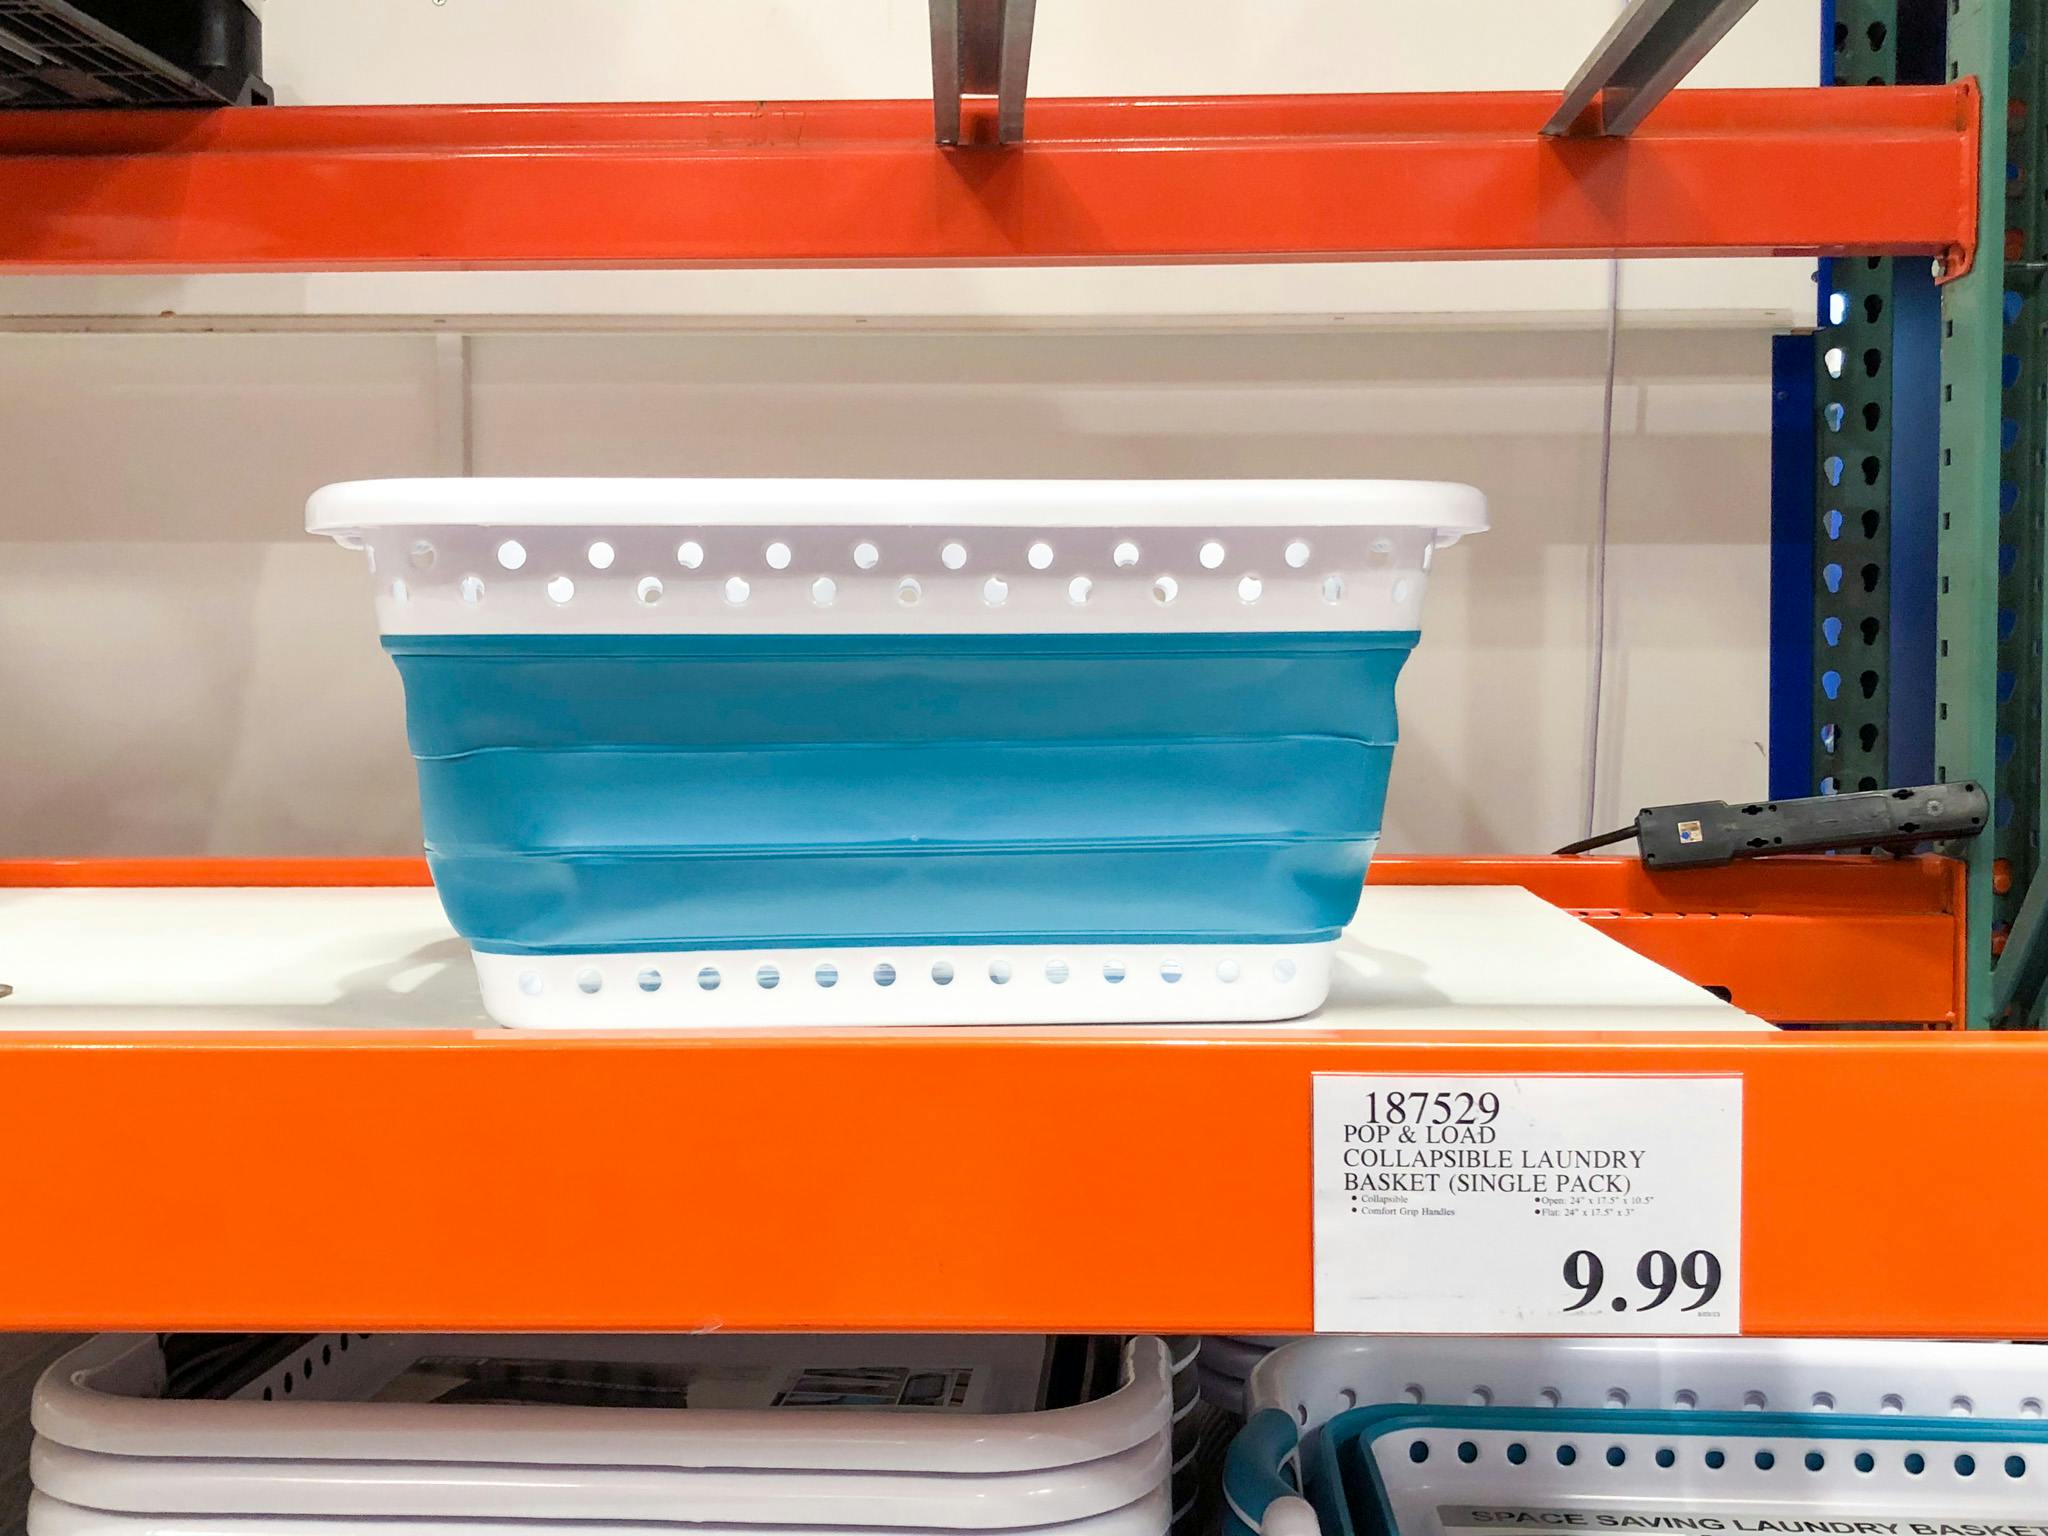 Pop & Load Collapsible Laundry Basket, Only $9.99 at Costco - The Krazy  Coupon Lady